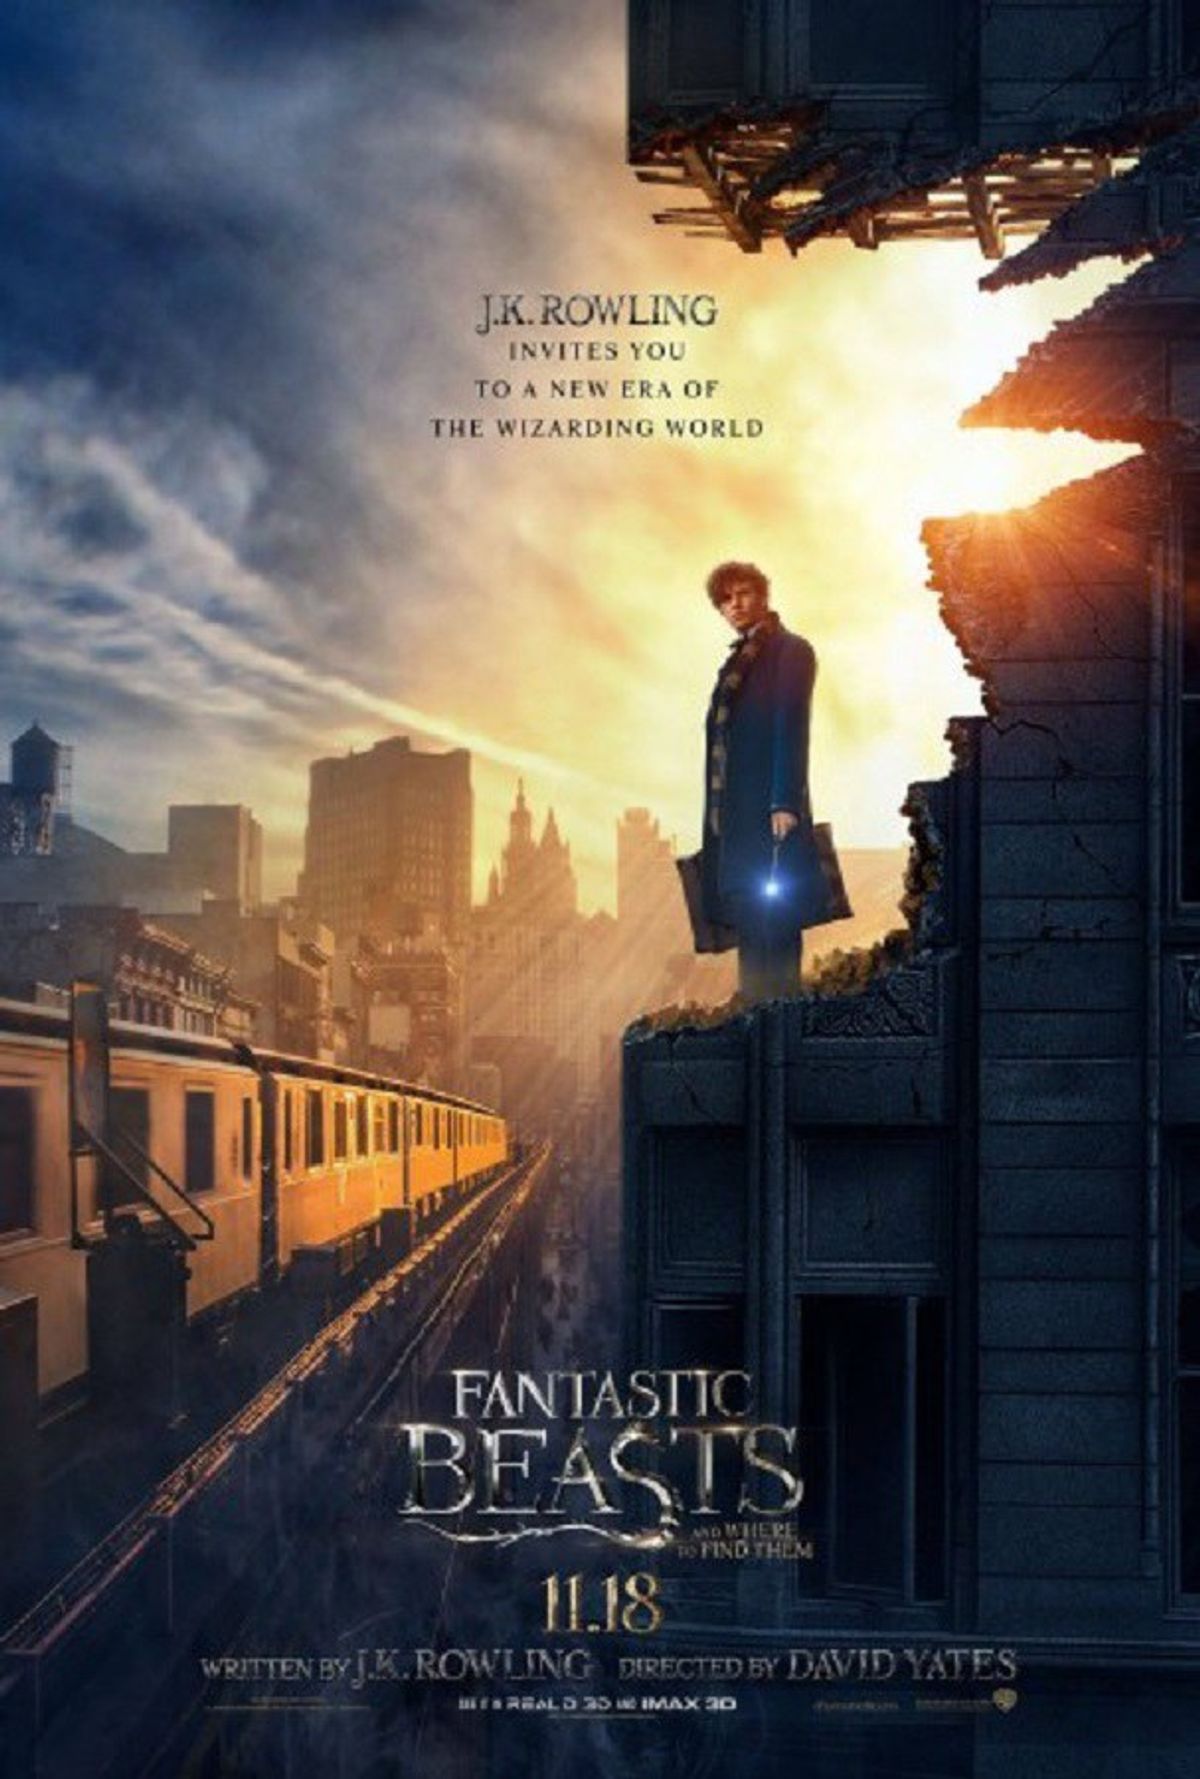 A Potterhead's Take On 'Fantastic Beasts And Where To Find Them'